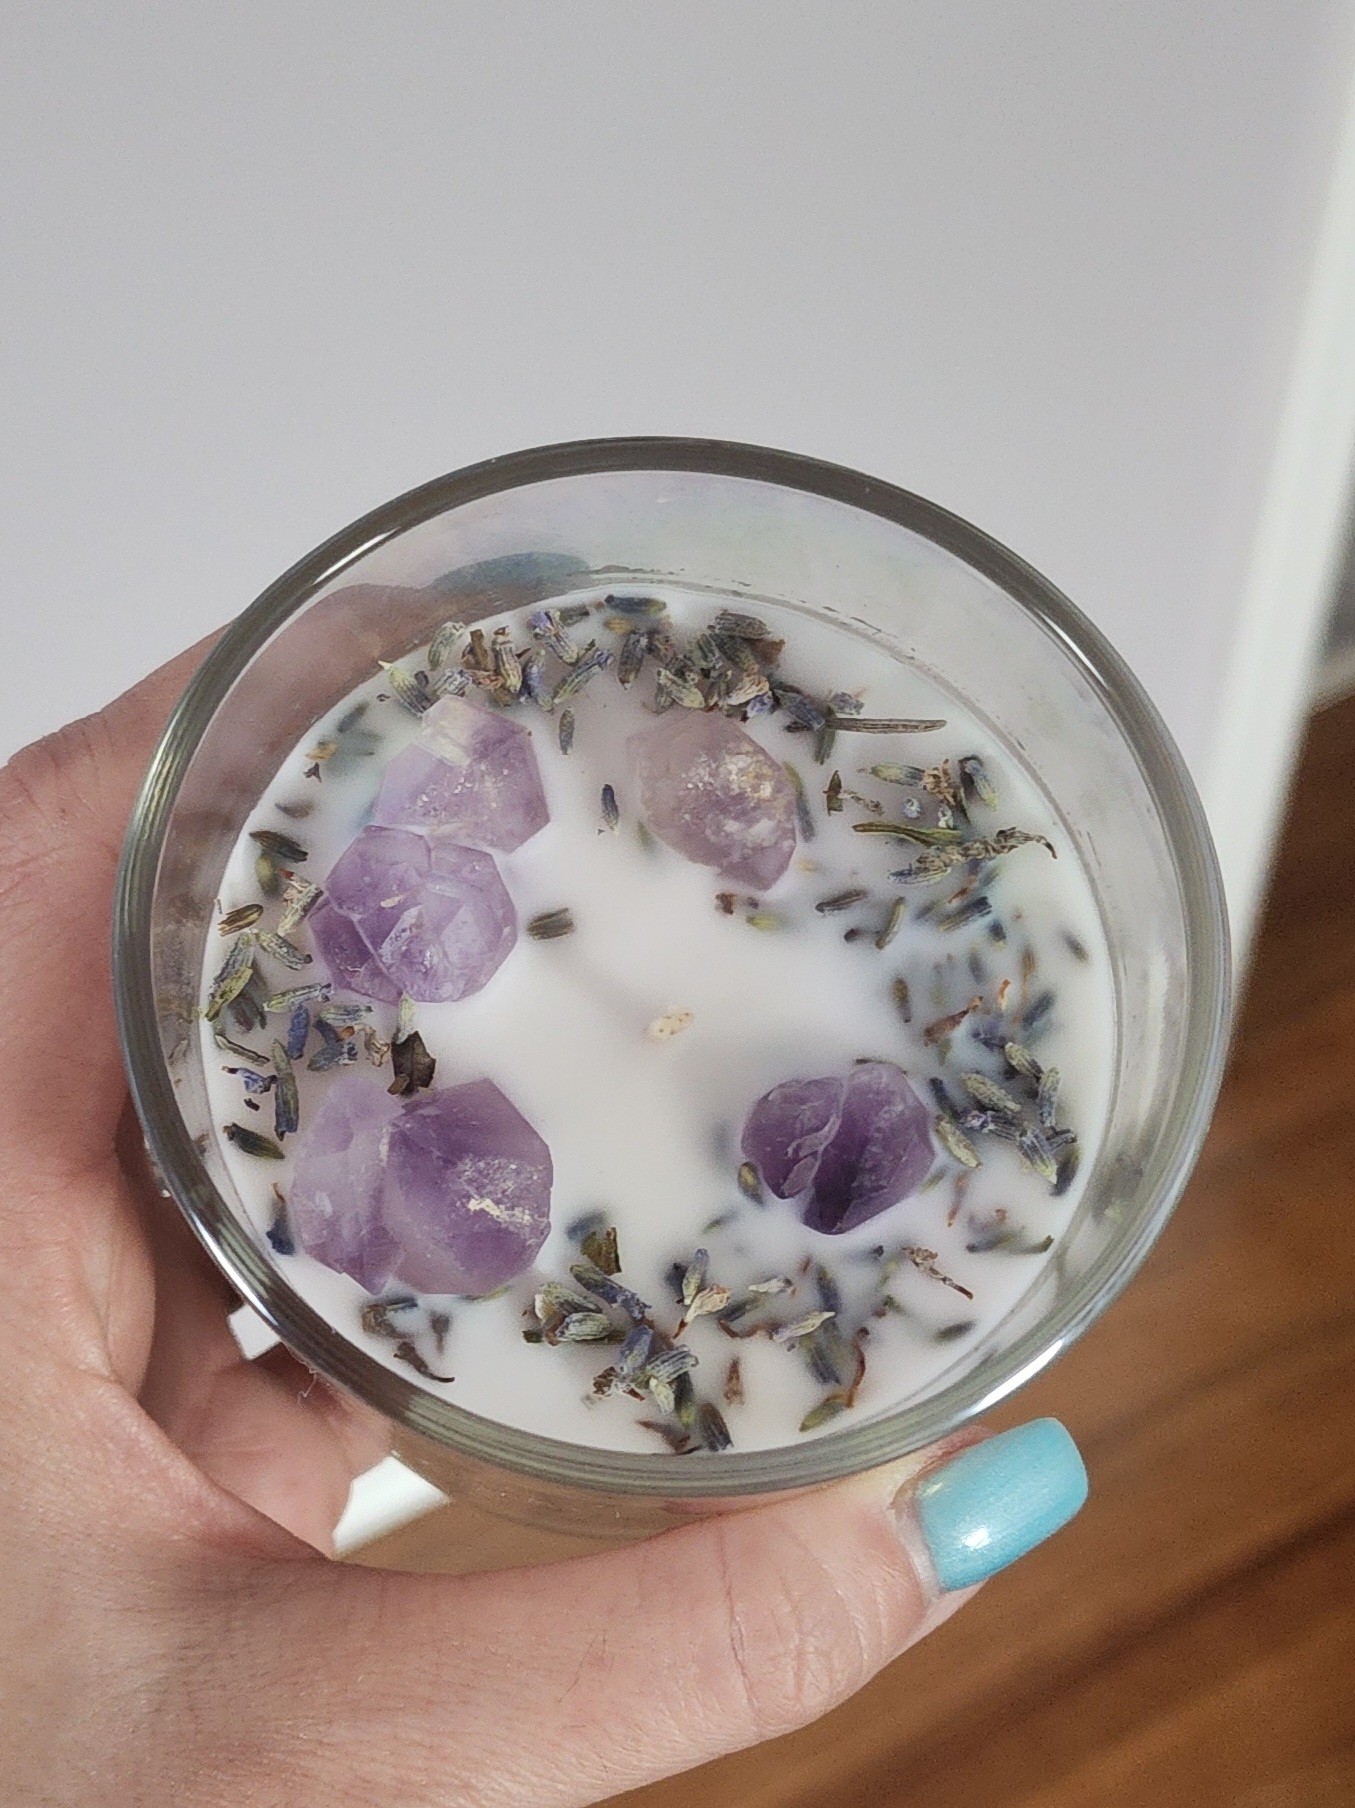 10oz glass coconut wax candles infused with lavender essential oil, amethyst crystals and dried lavender flowers.